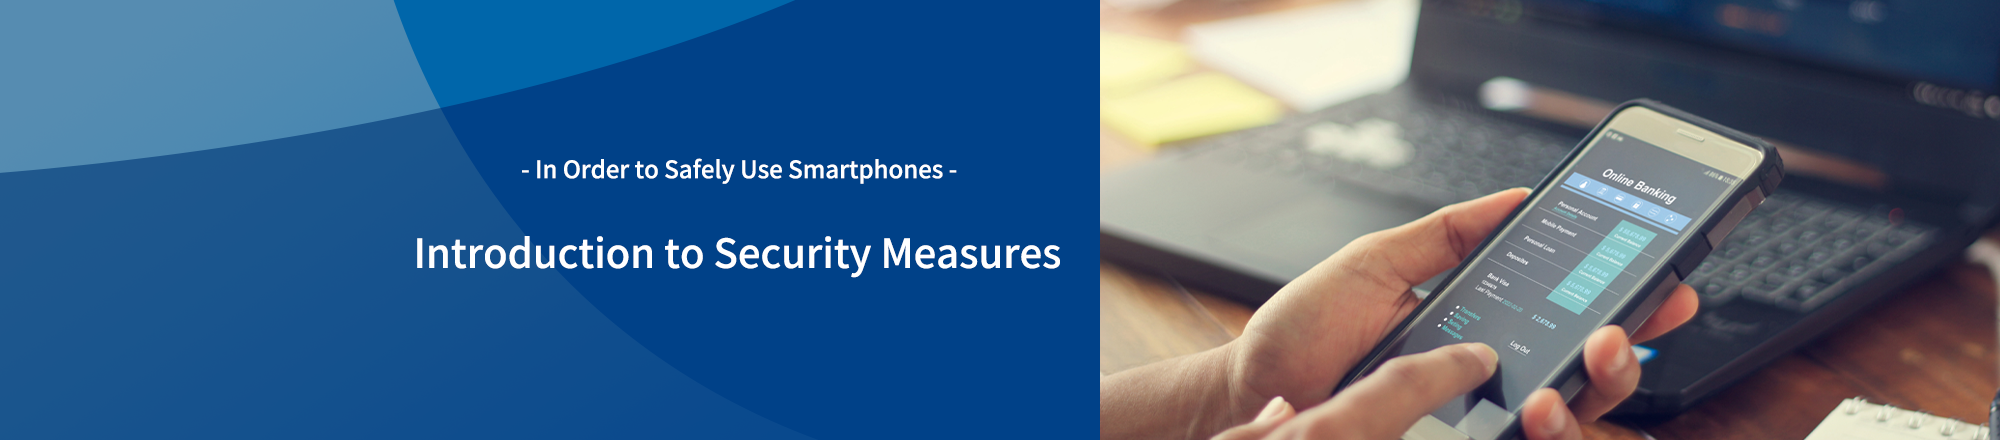 - In Order to Safely Use Smartphones - Introduction to Security Measures